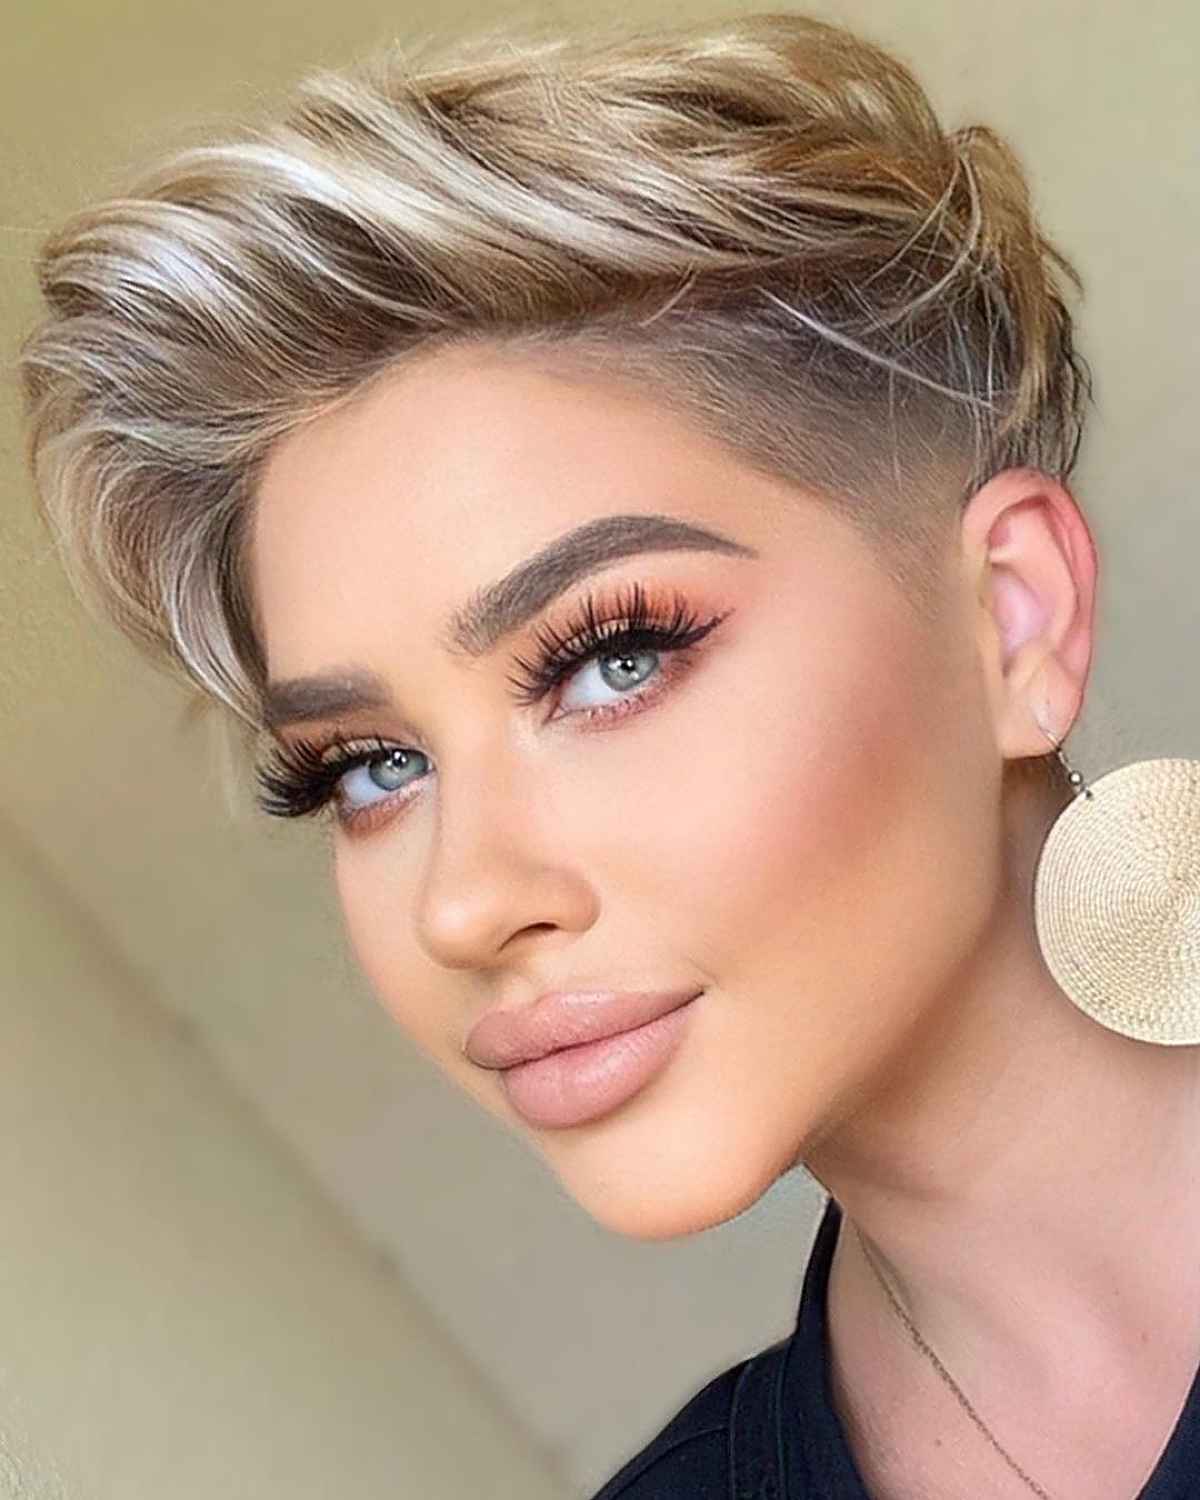 50 Hottest Short Haircuts For Women You'll Want To Try